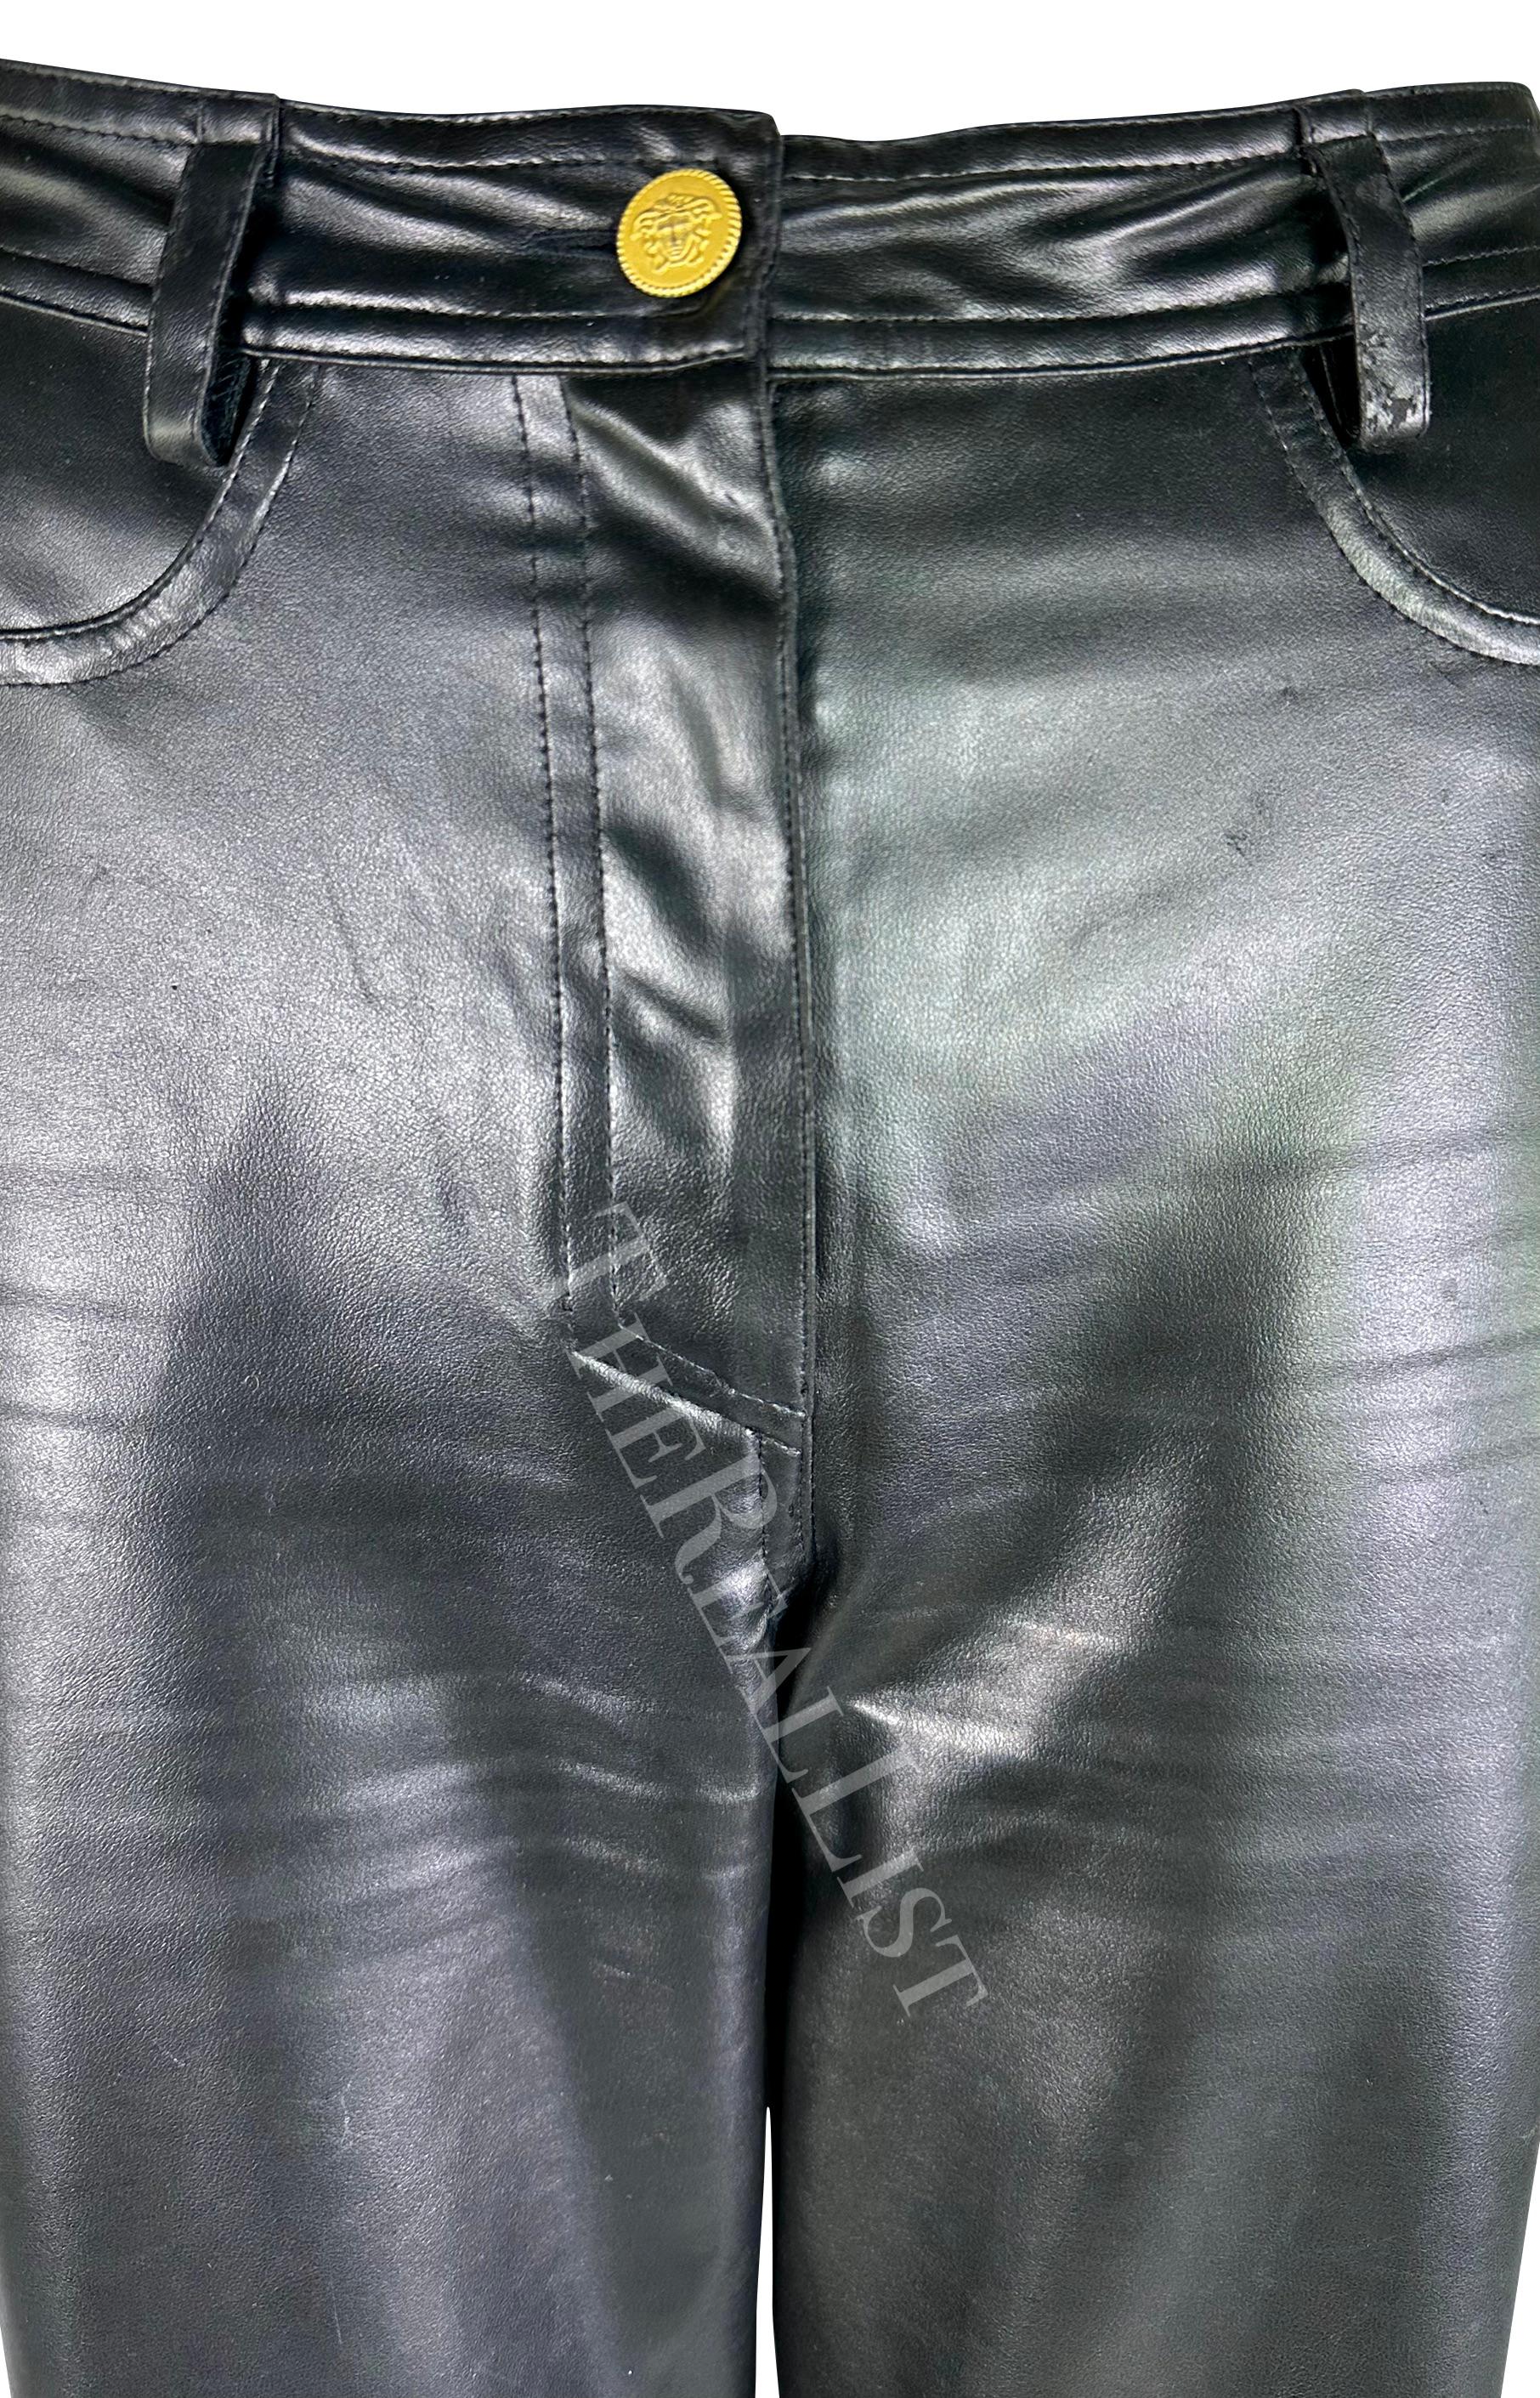 Presenting a pair of black faux leather Gianni Versace pants, designed by Gianni Versace. From the Fall/Winter 1996 collection, these pants are crafted from shiny vegan leather. Featuring a straight cut and a striking gold-tone Versace Medusa relief